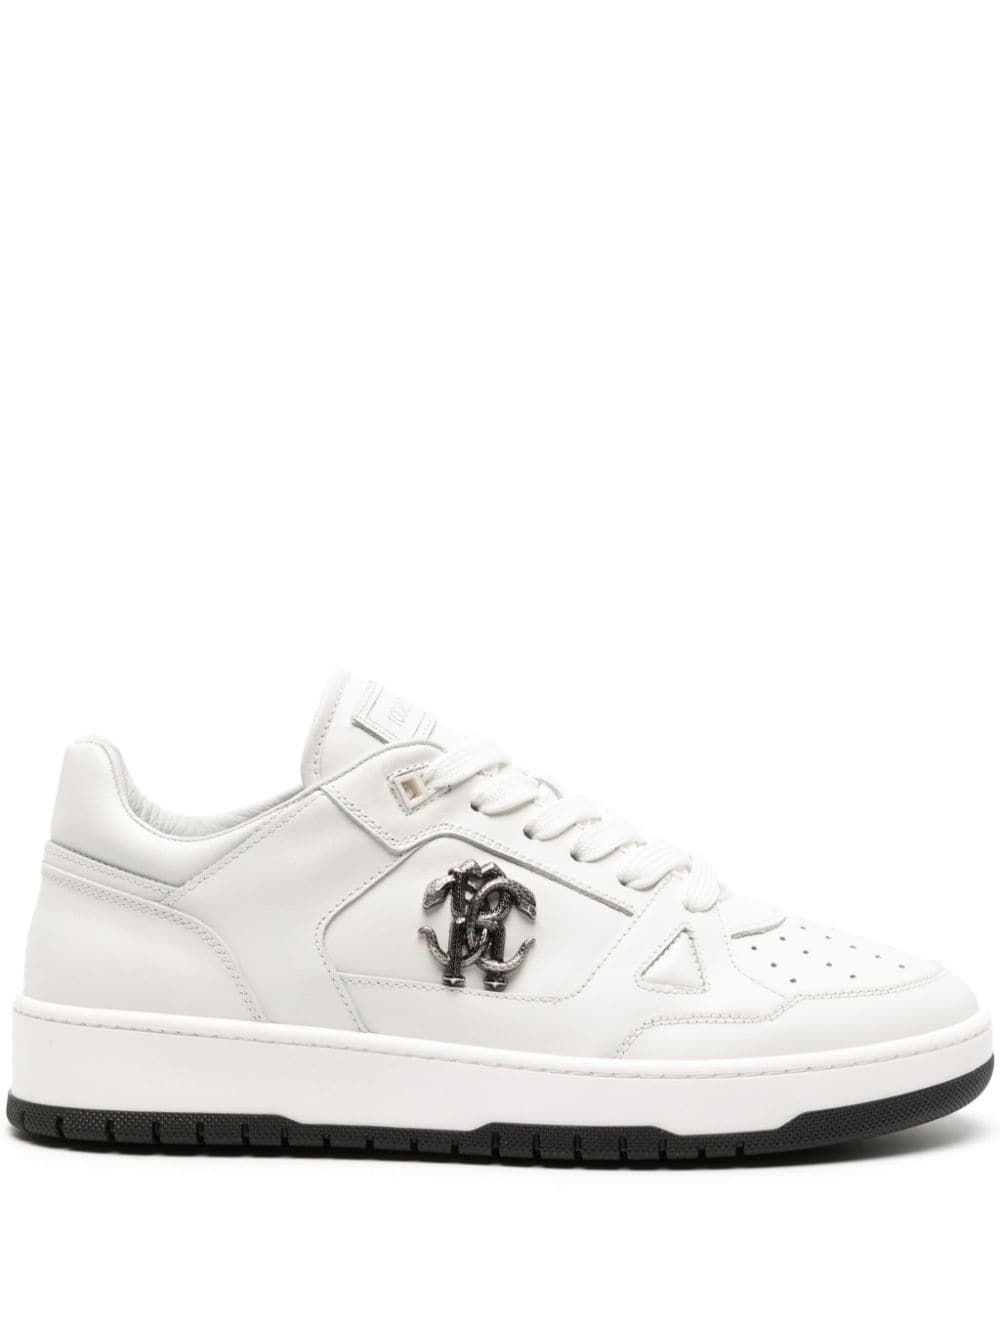 Roberto Cavalli Mirror Snake-embellished Leather Sneakers In White